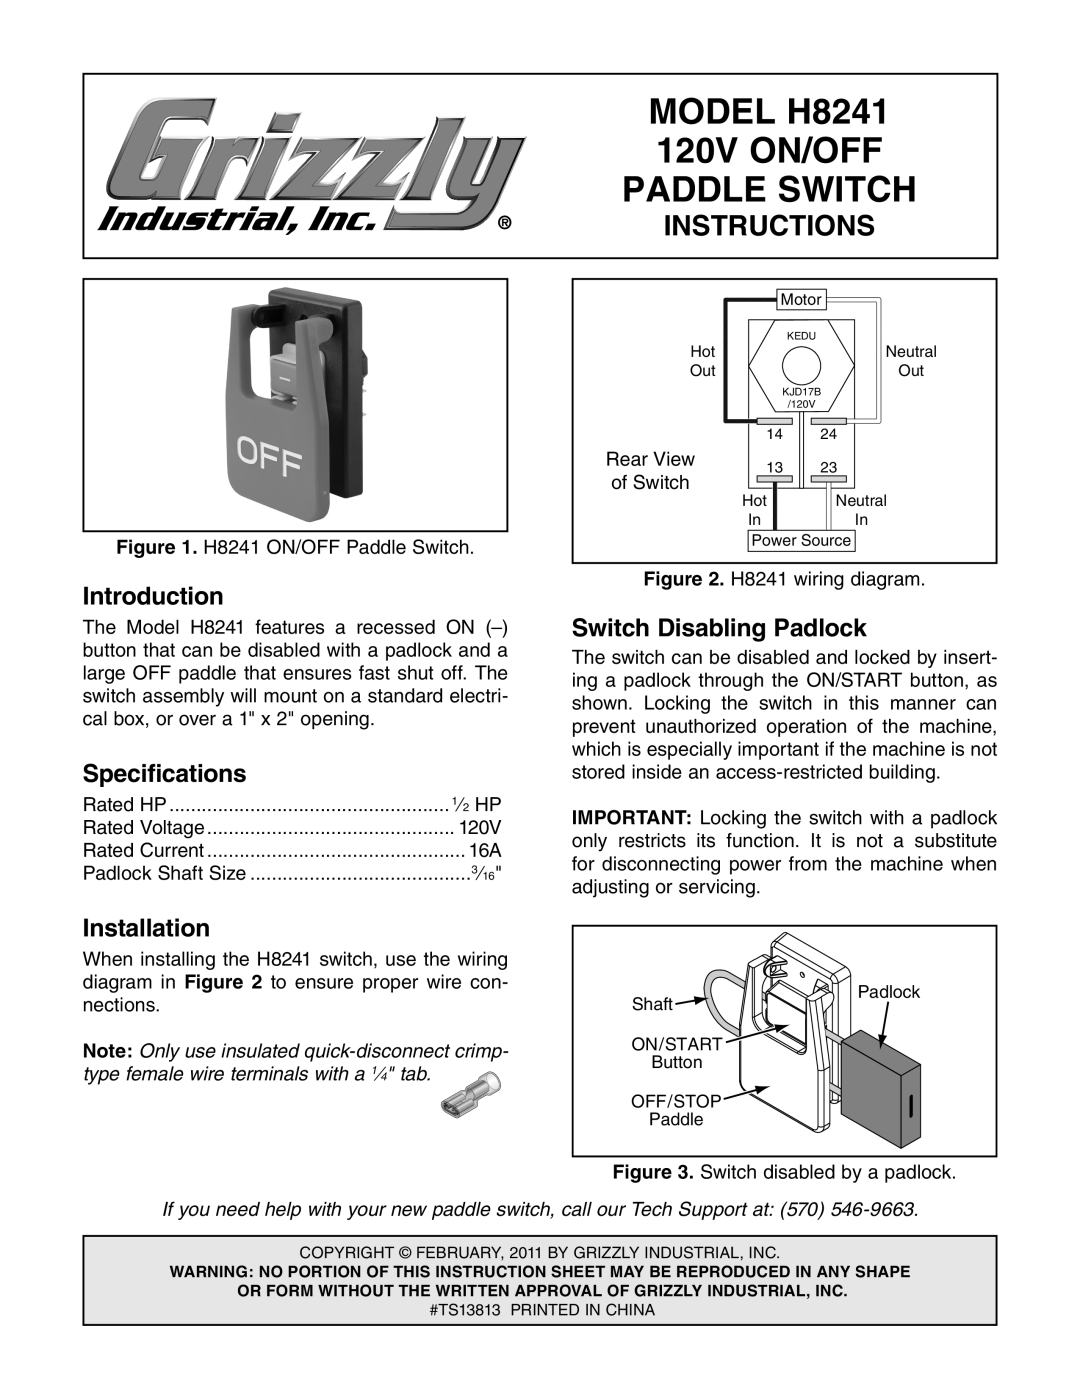 Grizzly specifications MODEL H8241, 120V ON/OFF, Paddle Switch, Instructions, Introduction, Specifications 